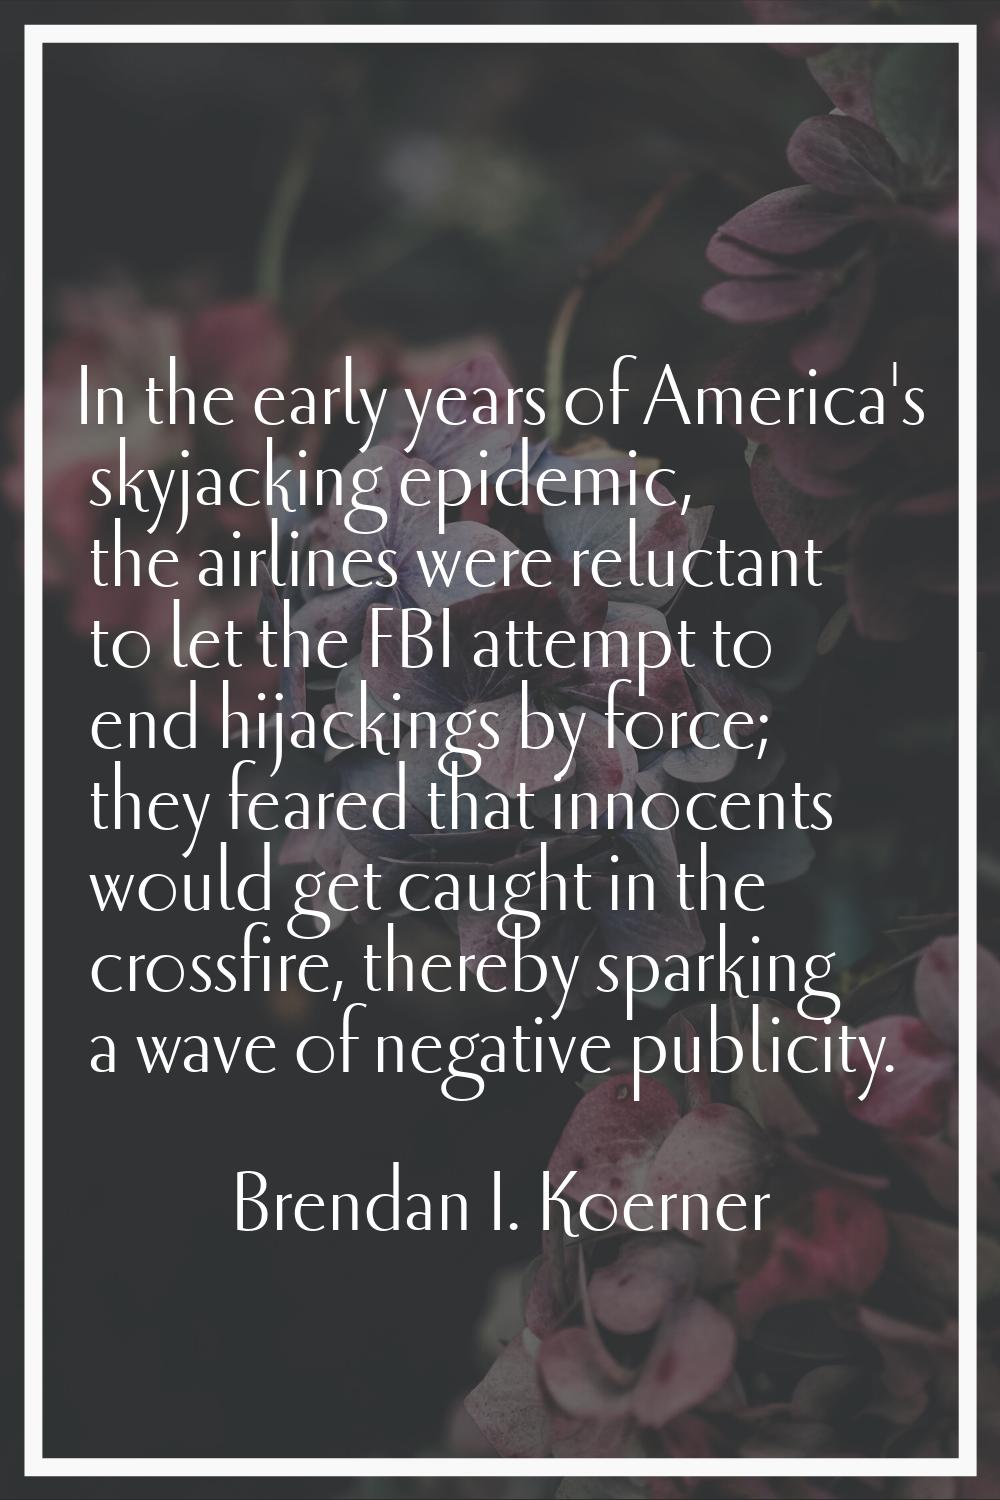 In the early years of America's skyjacking epidemic, the airlines were reluctant to let the FBI att